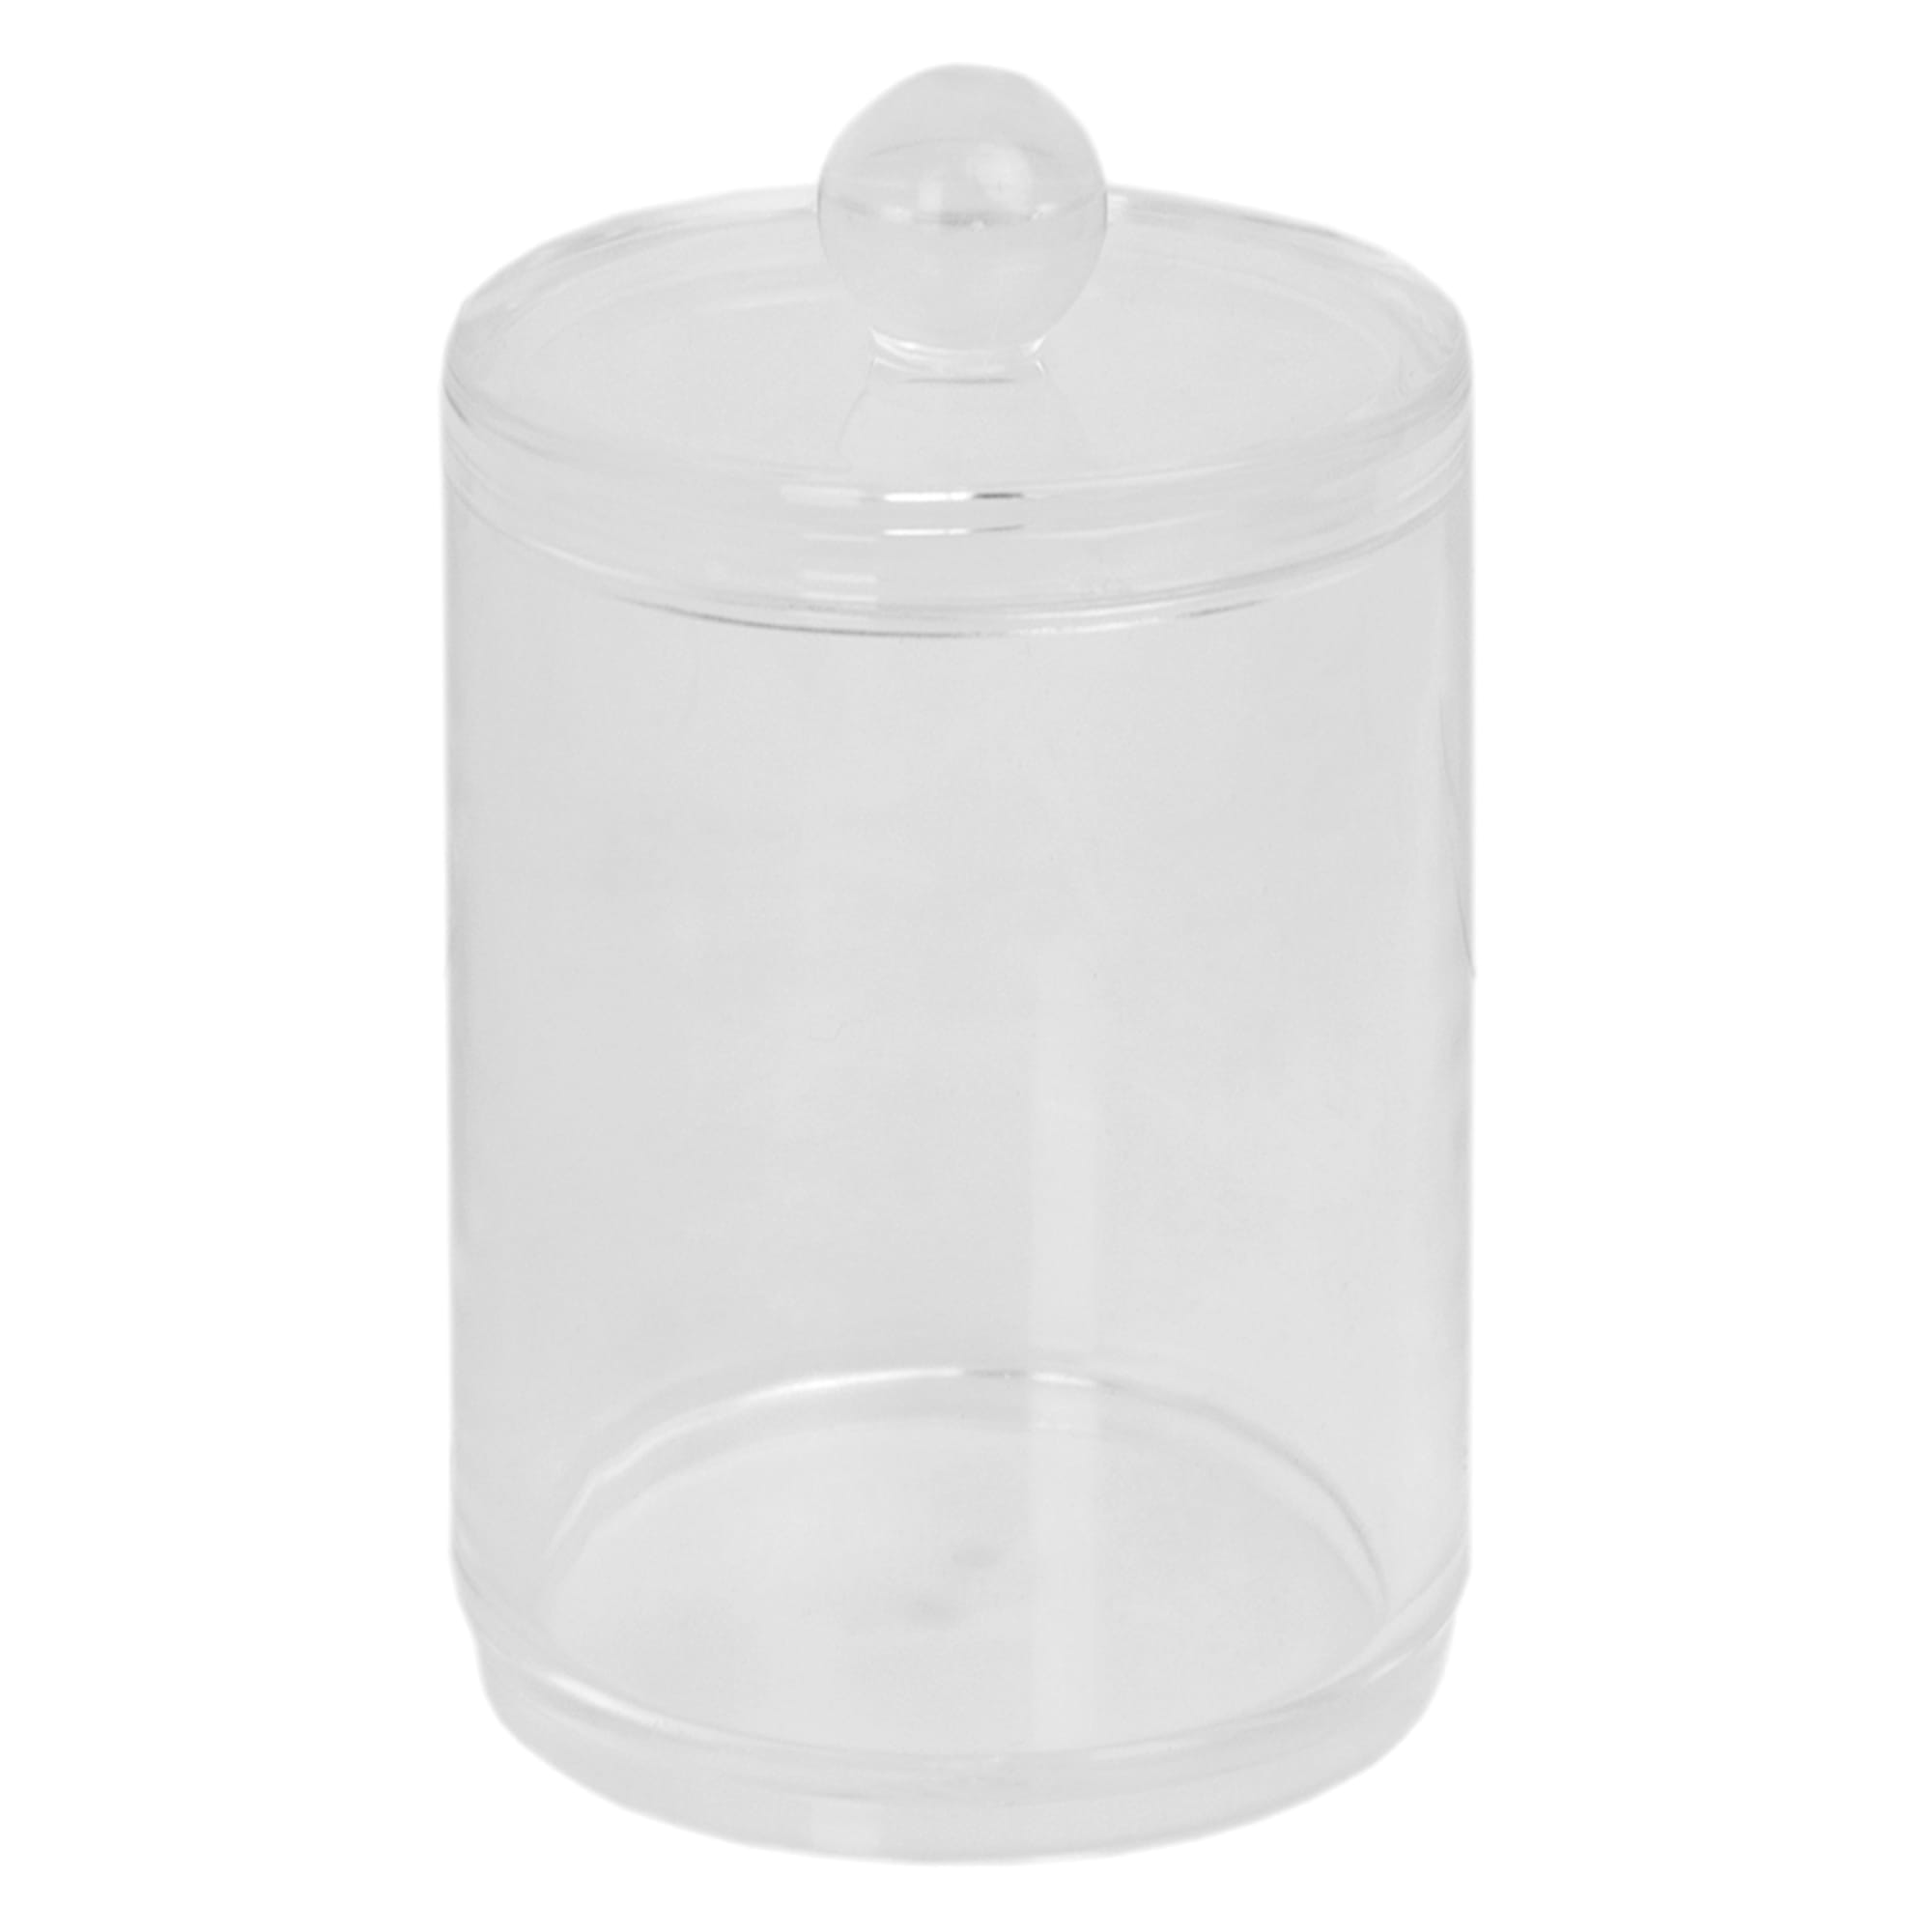 Home Basics Round Plastic Cotton Swab and Ball Holder, Clear $2.00 EACH, CASE PACK OF 12